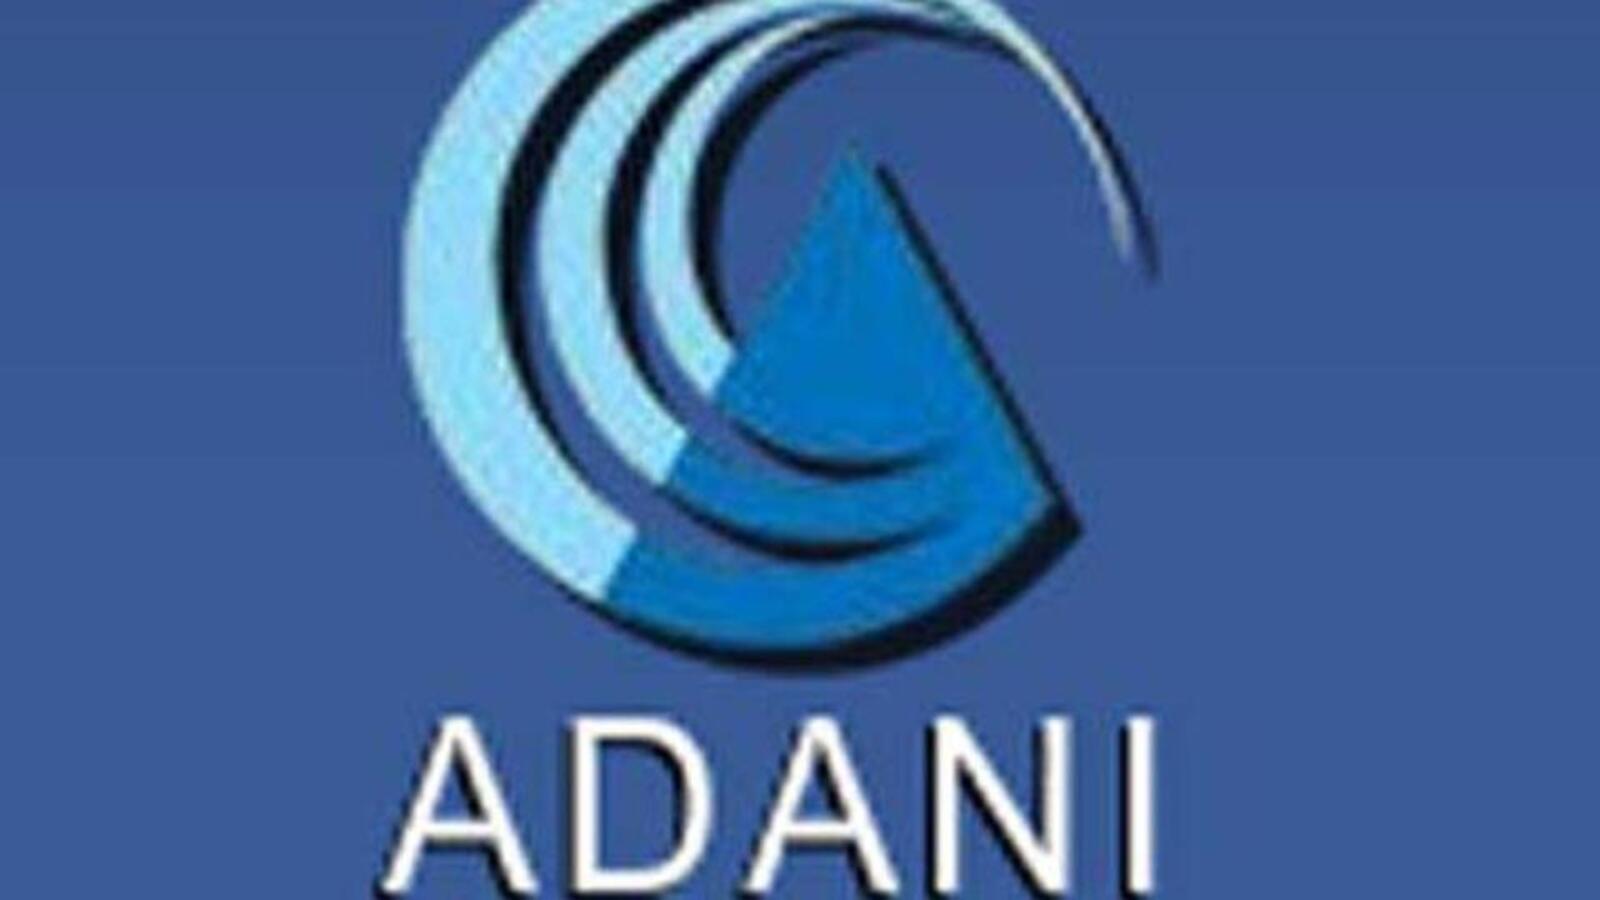 People are seen working on a truck next to the Adani logo on a poster...  News Photo - Getty Images